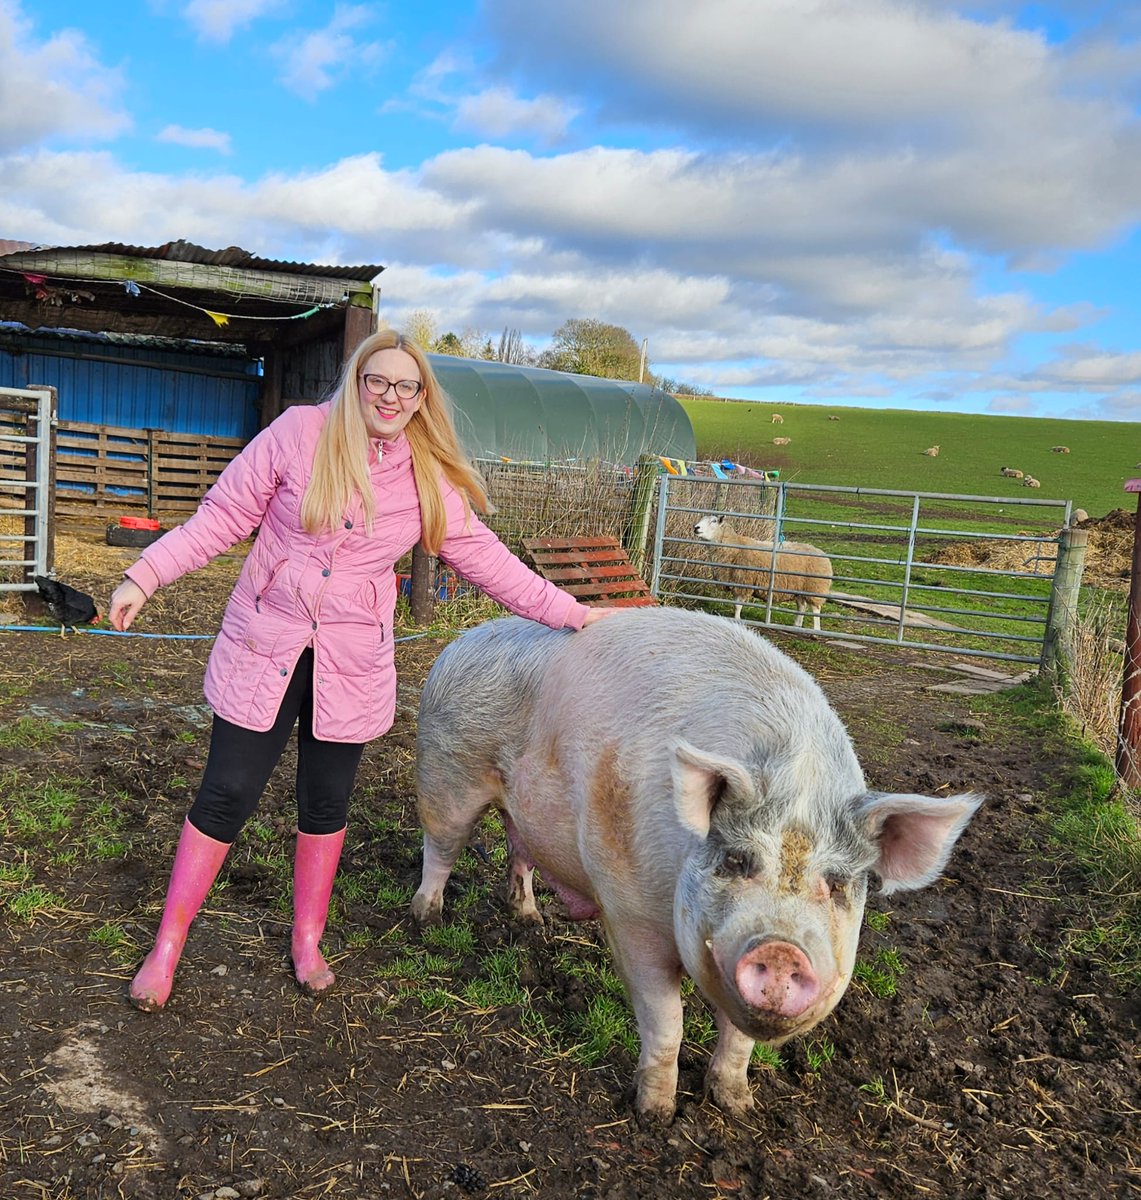 With #BigGeorgePig having his well-earned moment in the sun this wk (see the @PlantBasedNews article below) ☀👏 this seems a fitting moment to share these sweet pics of him with new friend Pattie (who adores ALL our pigs & is a #TobyPig sponsor 🙏🐗) 💖📸
plantbasednews.org/animals/the-nu…